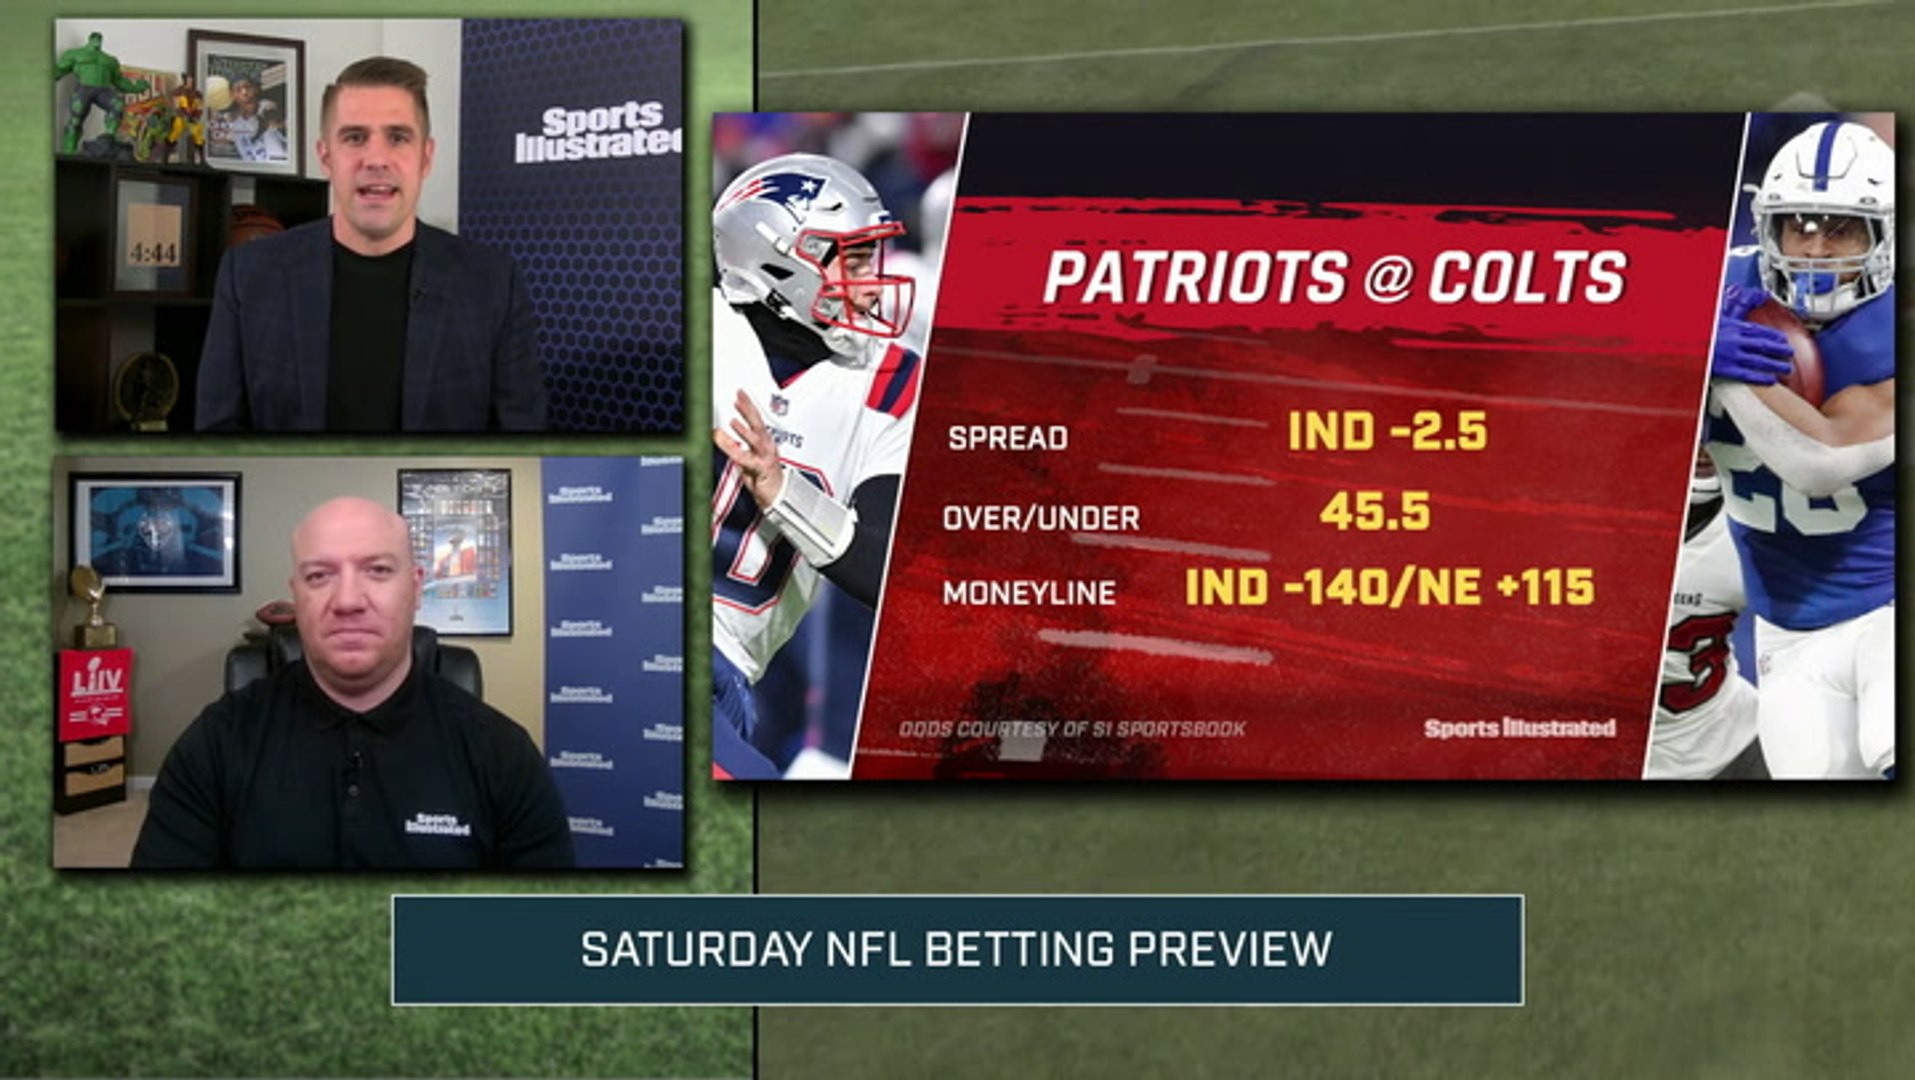 Week 15 NFL Betting Preview: Patriots vs. Colts